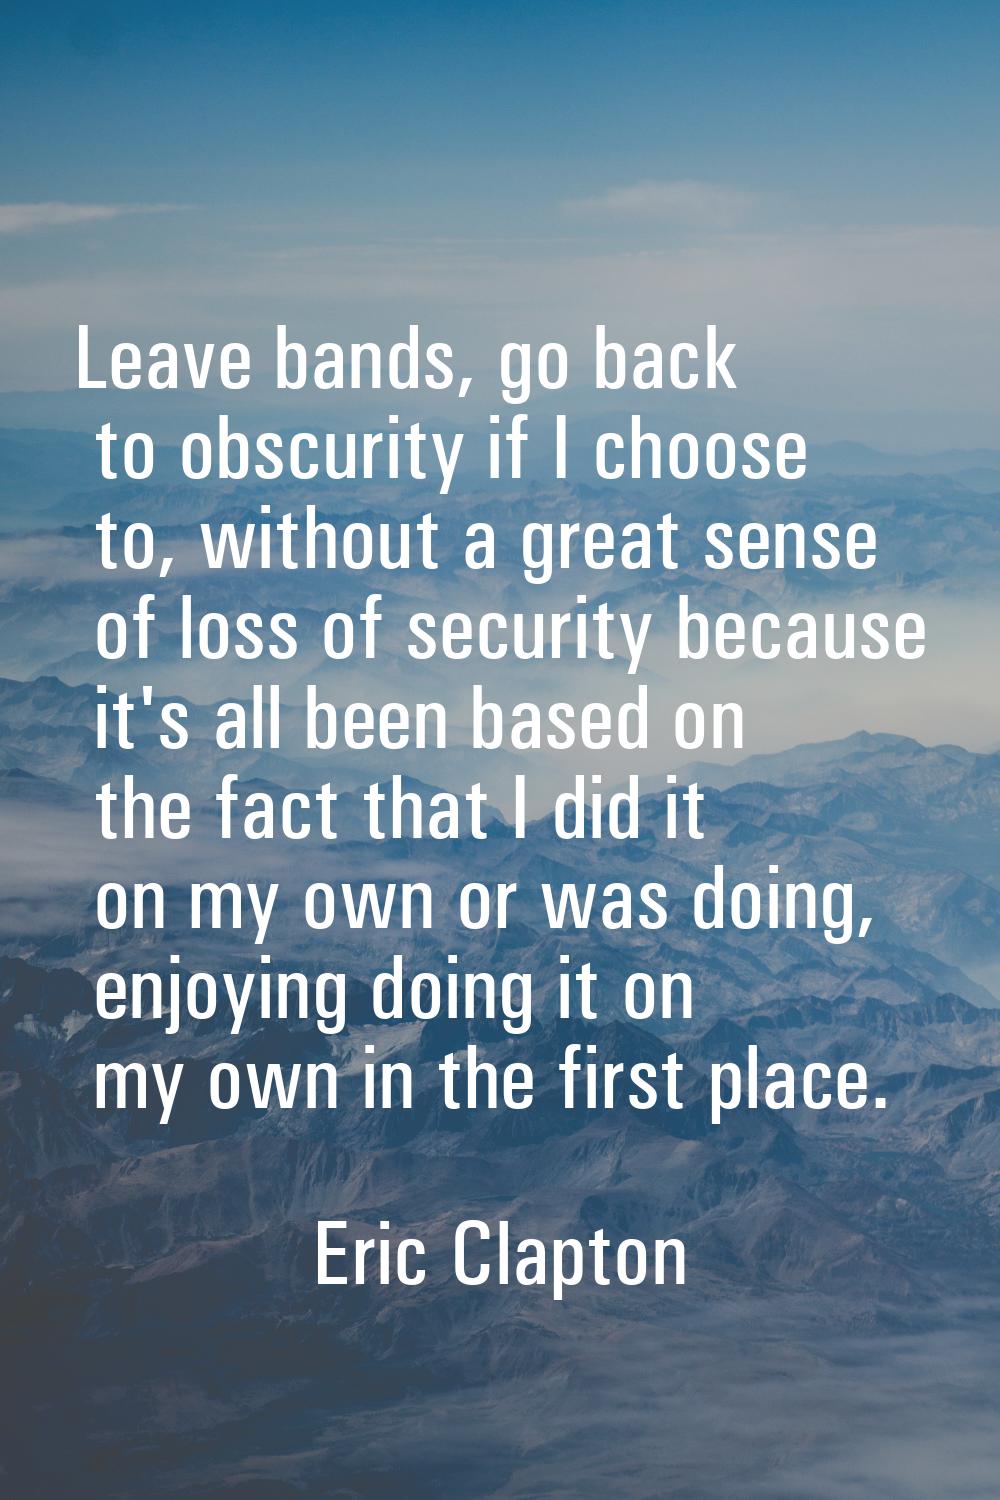 Leave bands, go back to obscurity if I choose to, without a great sense of loss of security because